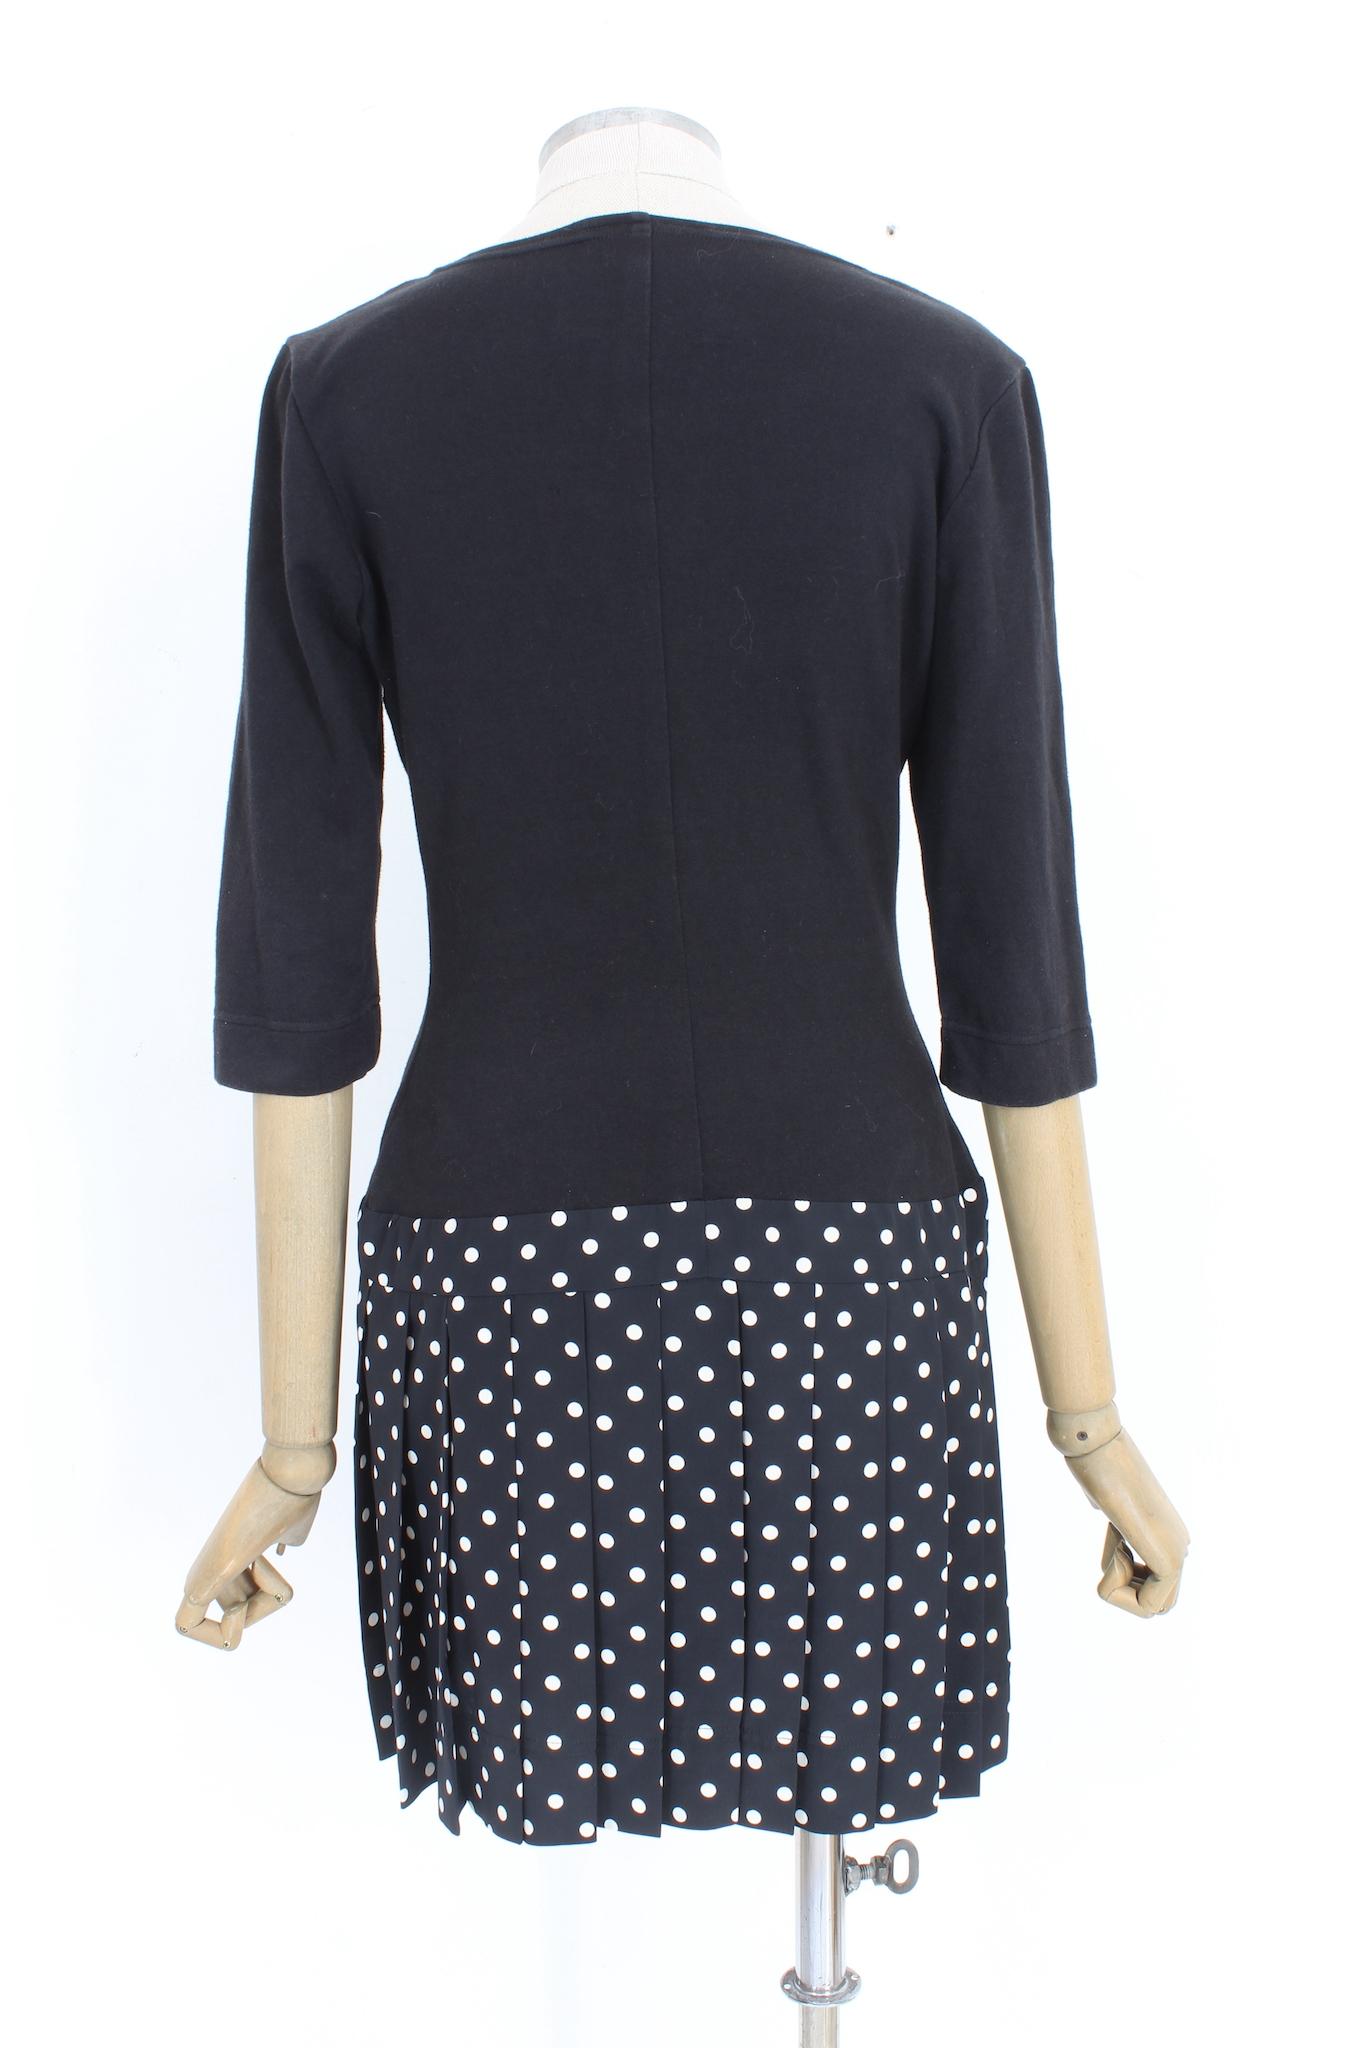 Moschino Cheap and Chic 90s vintage dress. Casual model, black fitted cotton shirt, black and white pleated skirt with polka dot pattern, belt at the waist. Fabric 92% cotton, 8% elastane. Made in Italy.

Size: 46 It 12 Us 14 Uk

Shoulder: 44